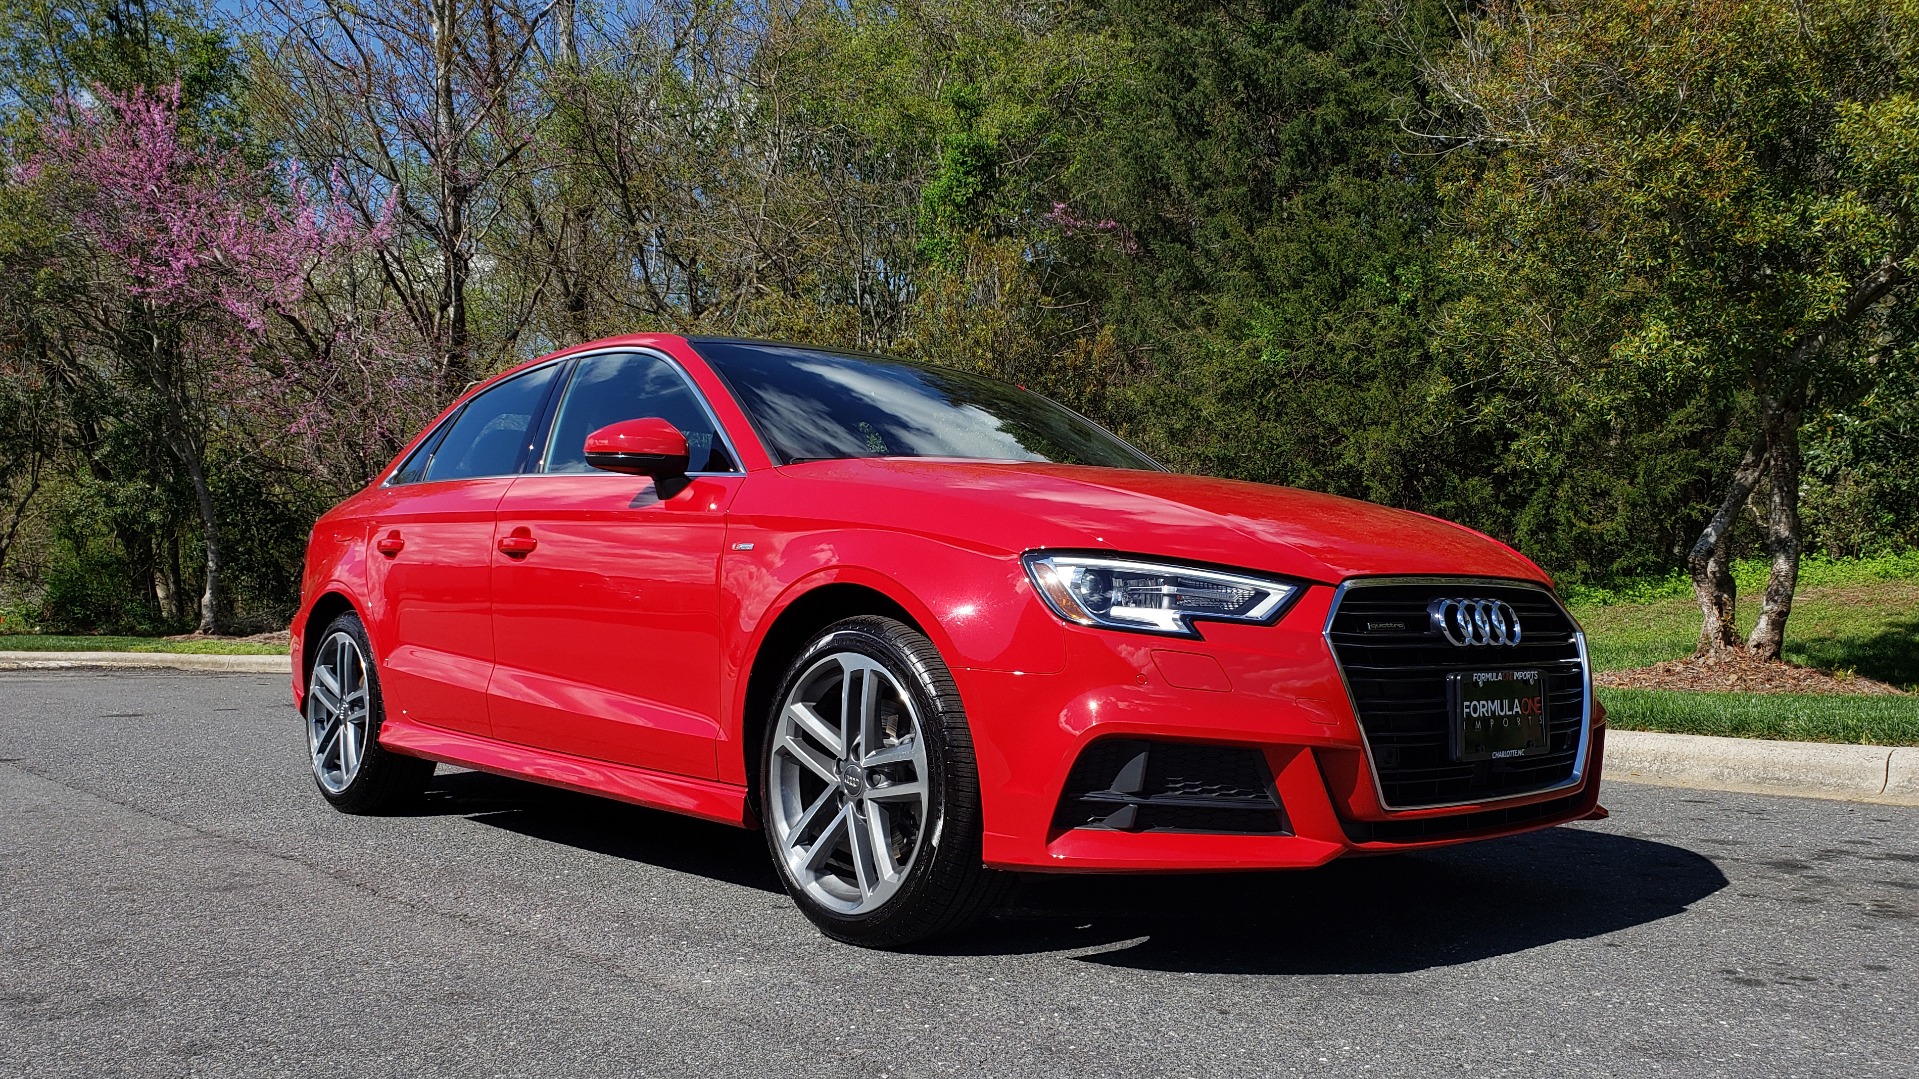 Used 2017 Audi A3 SEDAN PREMIUM PLUS / S-TRONIC / NAV / TECH / SUNROOF / REARVIEW for sale Sold at Formula Imports in Charlotte NC 28227 4